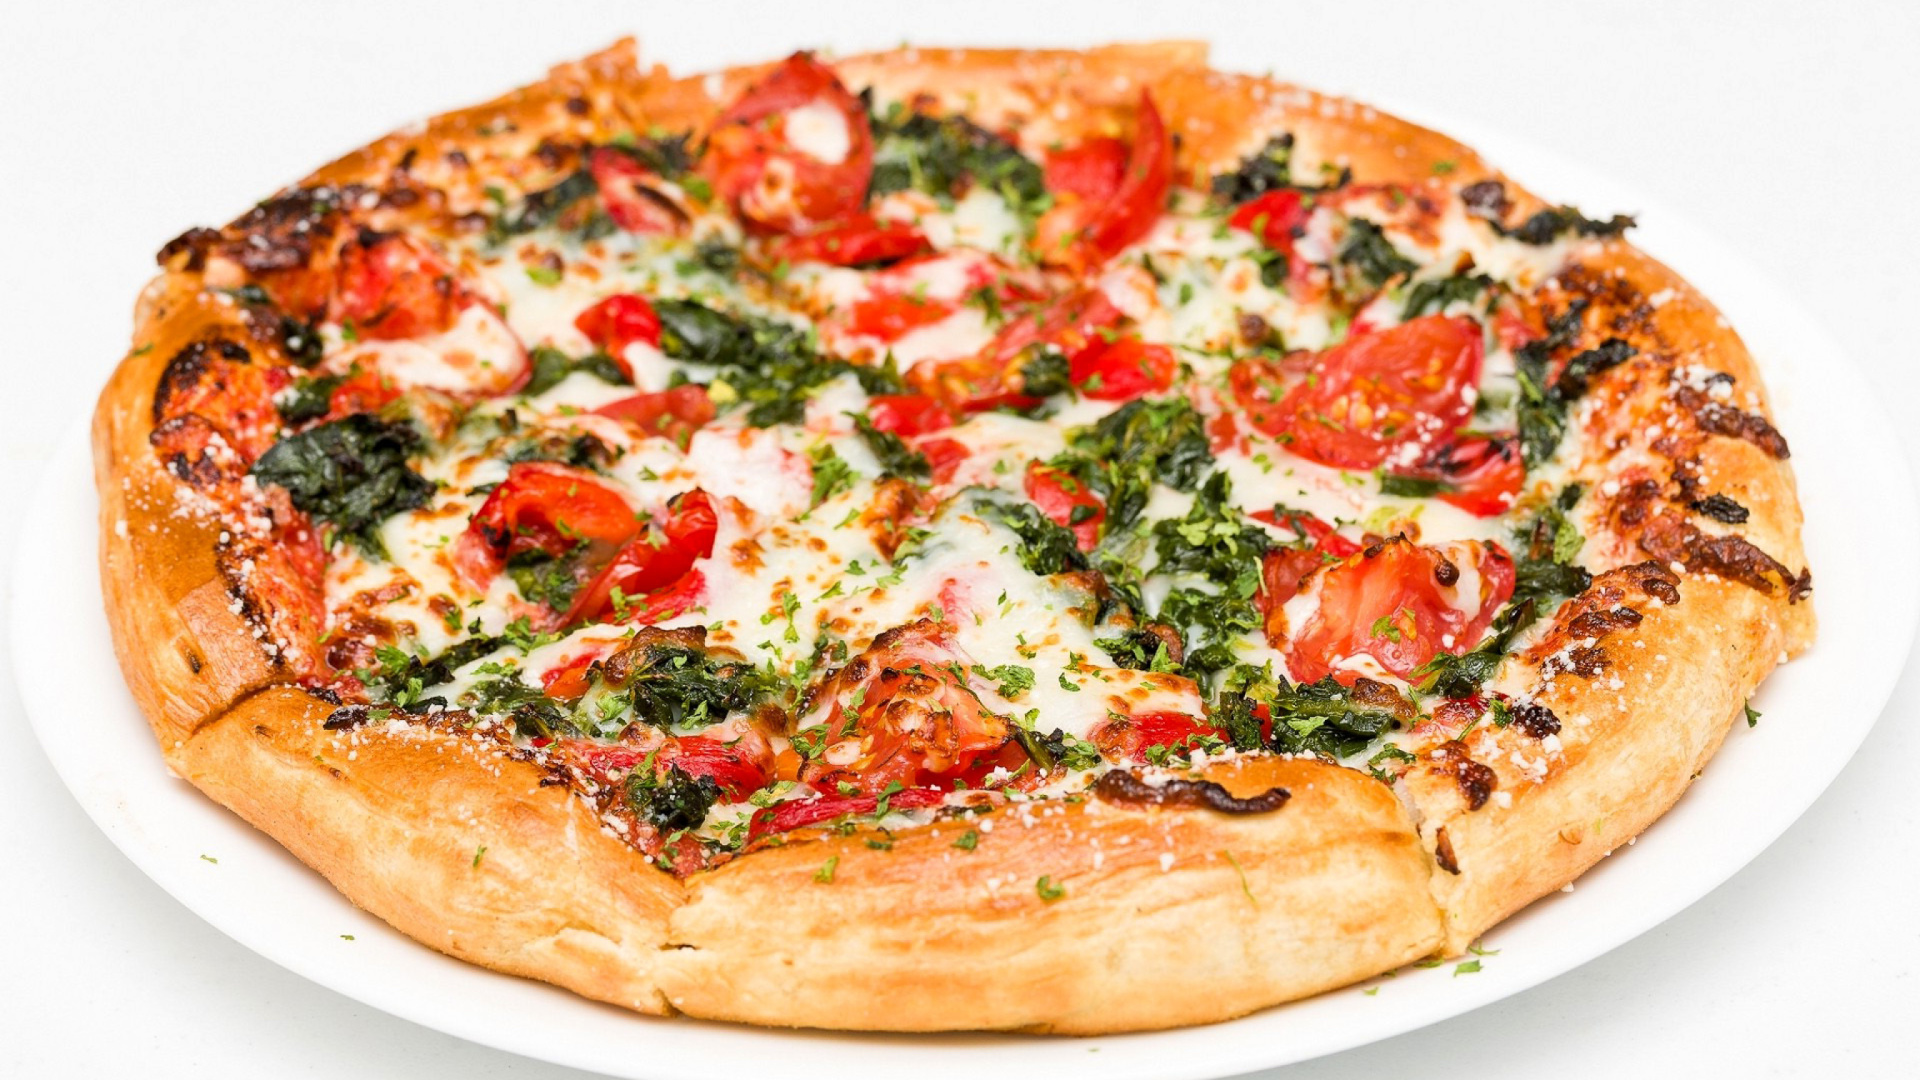 Pizza with spinach screenshot #1 1920x1080